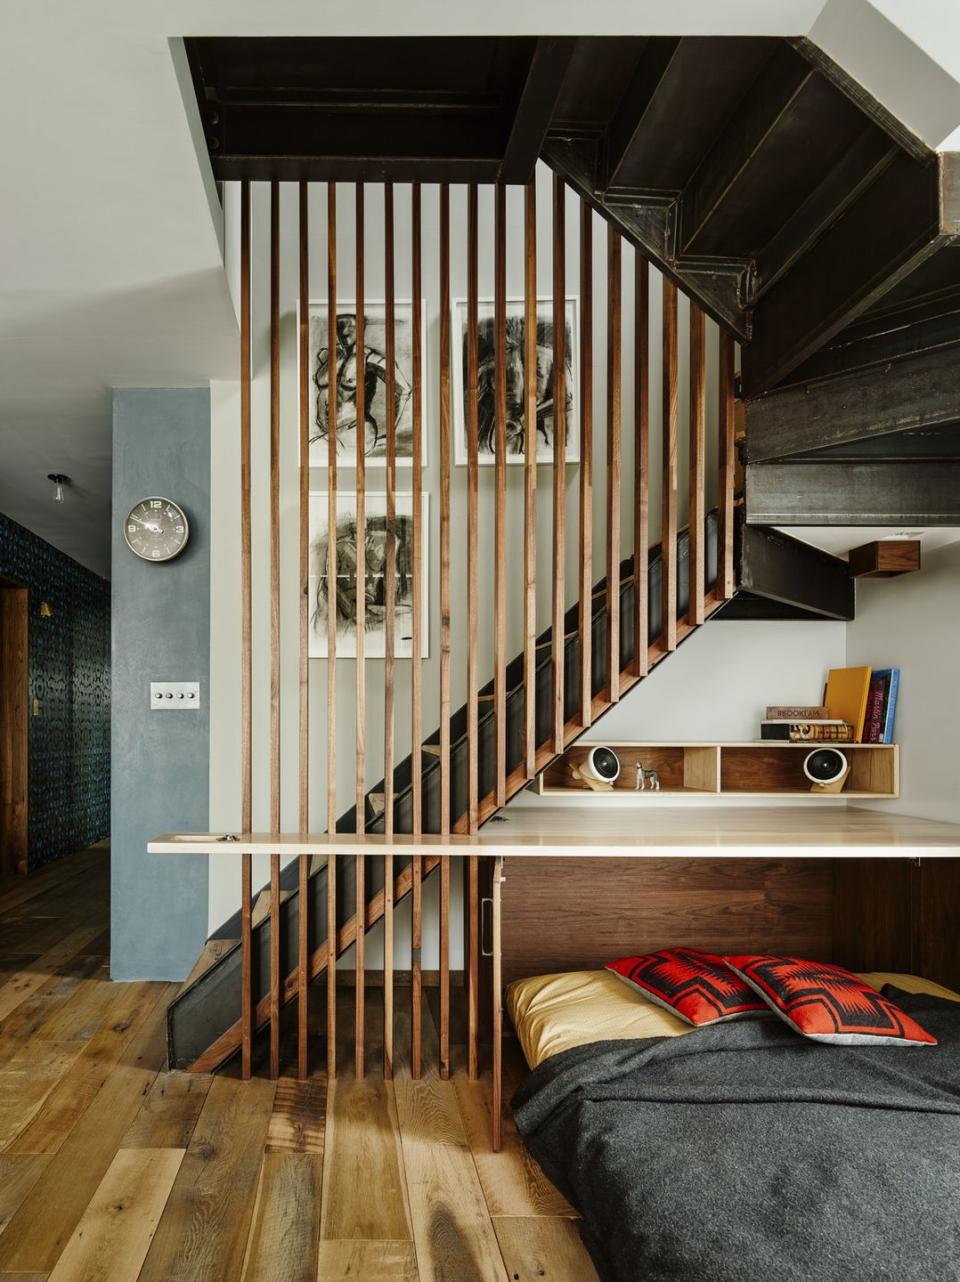 japanese style sleeping mat in brooklyn home by designers sarah zames and colin stief